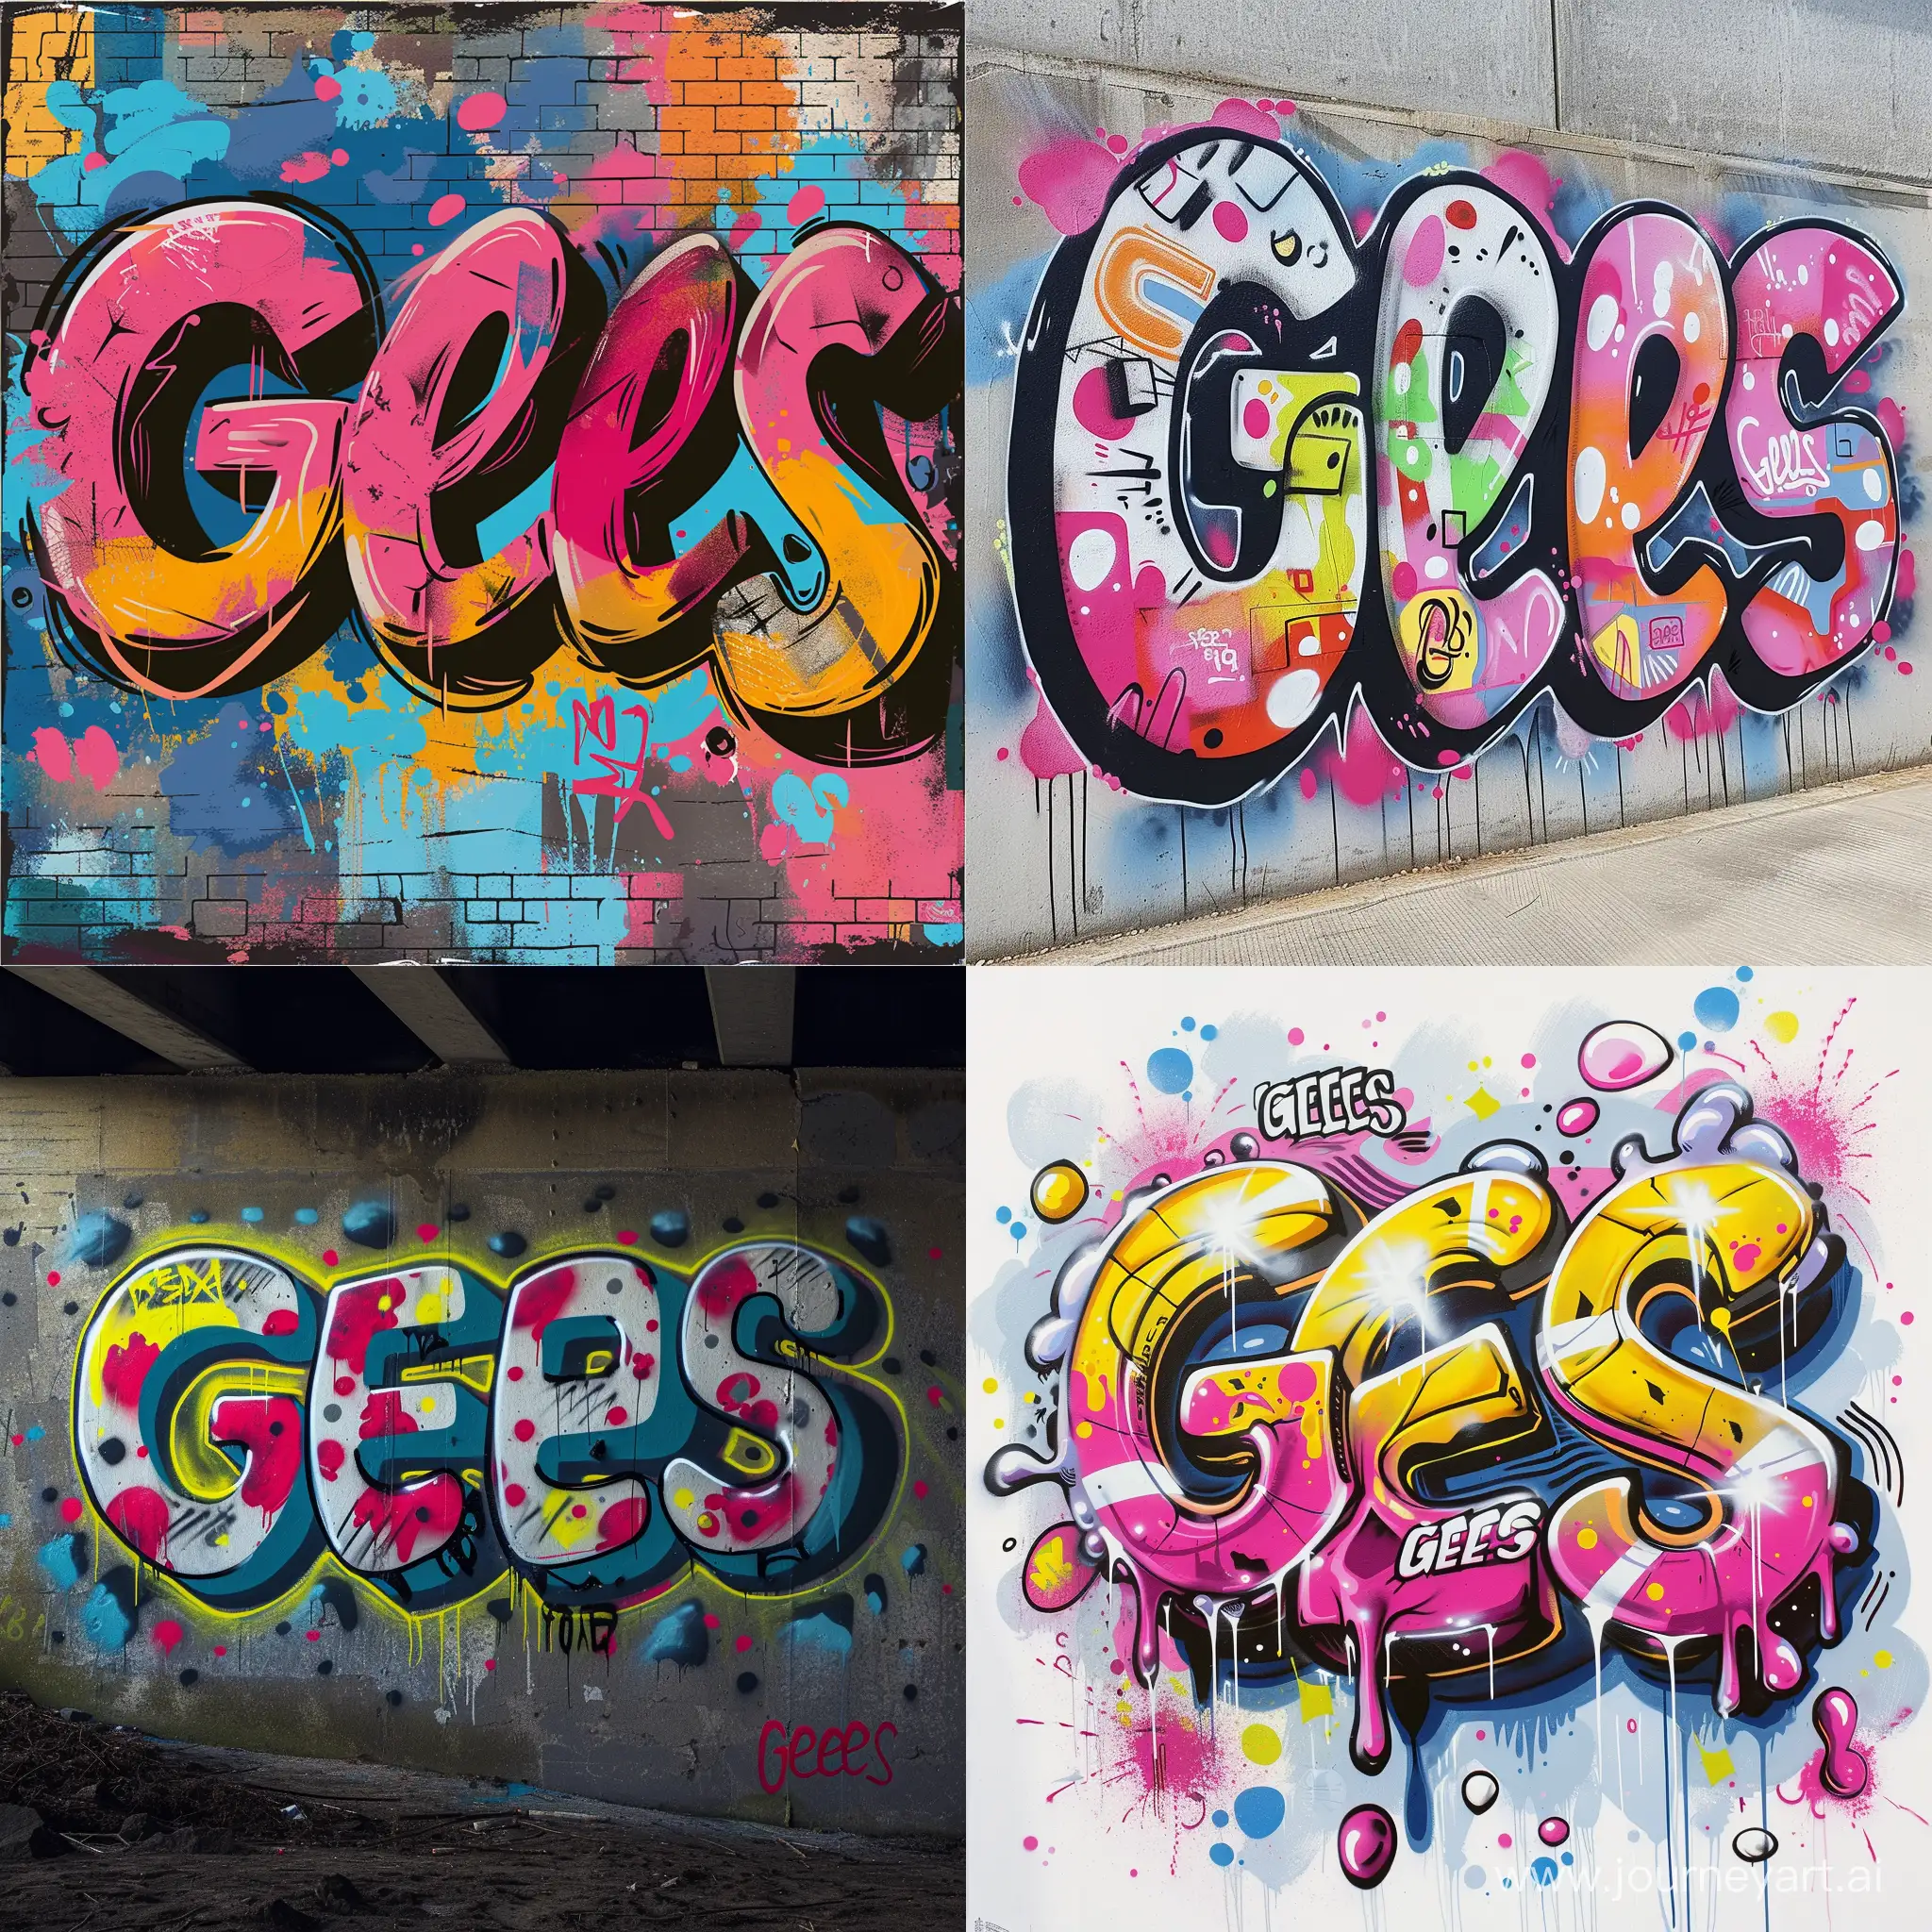 The word "Gees" in graffiti style